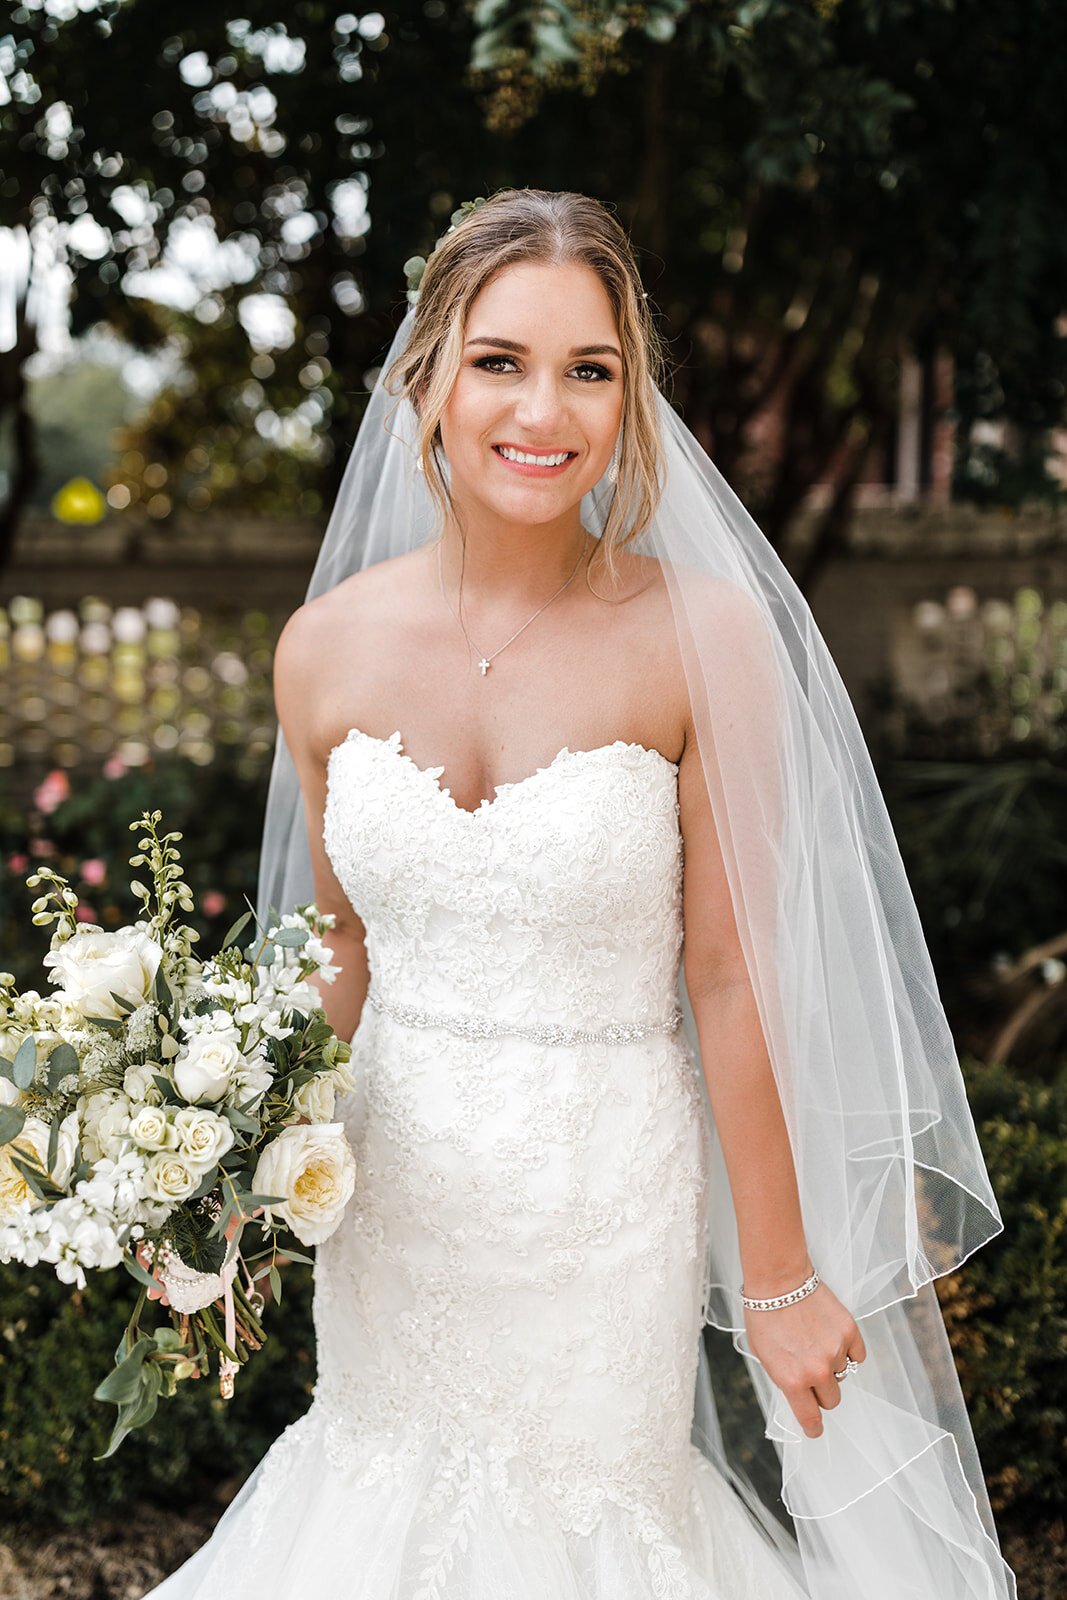 ivory-and-bride-down-for-the-gown-cassie-real-bride-wedding-dress-maggie-sottero-blog-bridal-blog-wedding-dress-mermaid-bridal-gown-wedding-gown-bridal-shop-bridal-boutique-bridal-shopping-bridal-style-savannah-georgia-GMP504-436.jpg